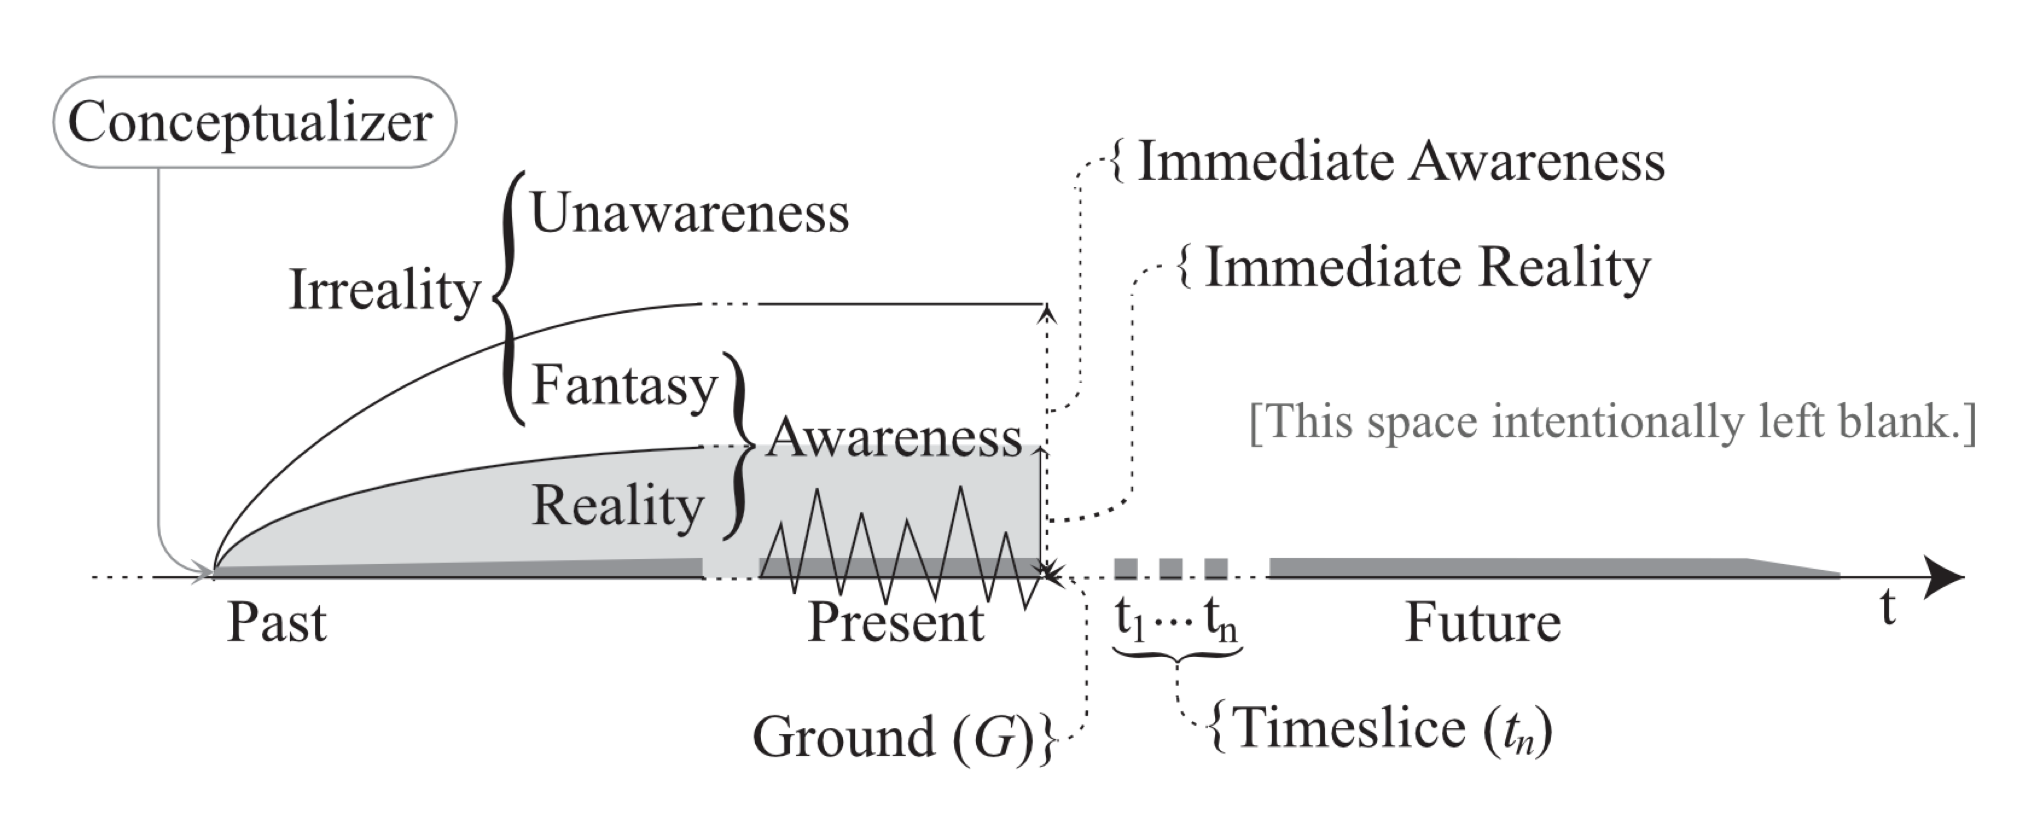 This diagram adds onto what has come before. At the point on the timeline where the thin grey layer starts, a parabolic curve begins and heads to the right, then it levels out. An outer curve starts at the same place, enclosing the inner curve with soem space in between. Imagine cutting a cucumber lengthwise (make it a straight, typical garden cucumber), where you would have a thin line down the middle, then a gel layer (with seeds), where that gel layer lies within an outer layer that is the flesh. The thin cucumber skin would be the outer curve, then, and the division between the flesh and seed areas would be the inner curve. In the deescription of this model that appears in the primary text, the seed area would be the area that gets identified as reality, and the flesh area would be fantasy. The union of those two areas (i.e., anything inside of the cucumber) would be awareness. Anything outside of the cucumber would be unawareness. Anything outside of reality (i.e., beyond the seeded area, including everything entirely outside of the cucumber) woudl be irreality. At this point, the diagram only goes partway to the right, slicing the cucumber transversely at the present moment, just to the right of the ground.